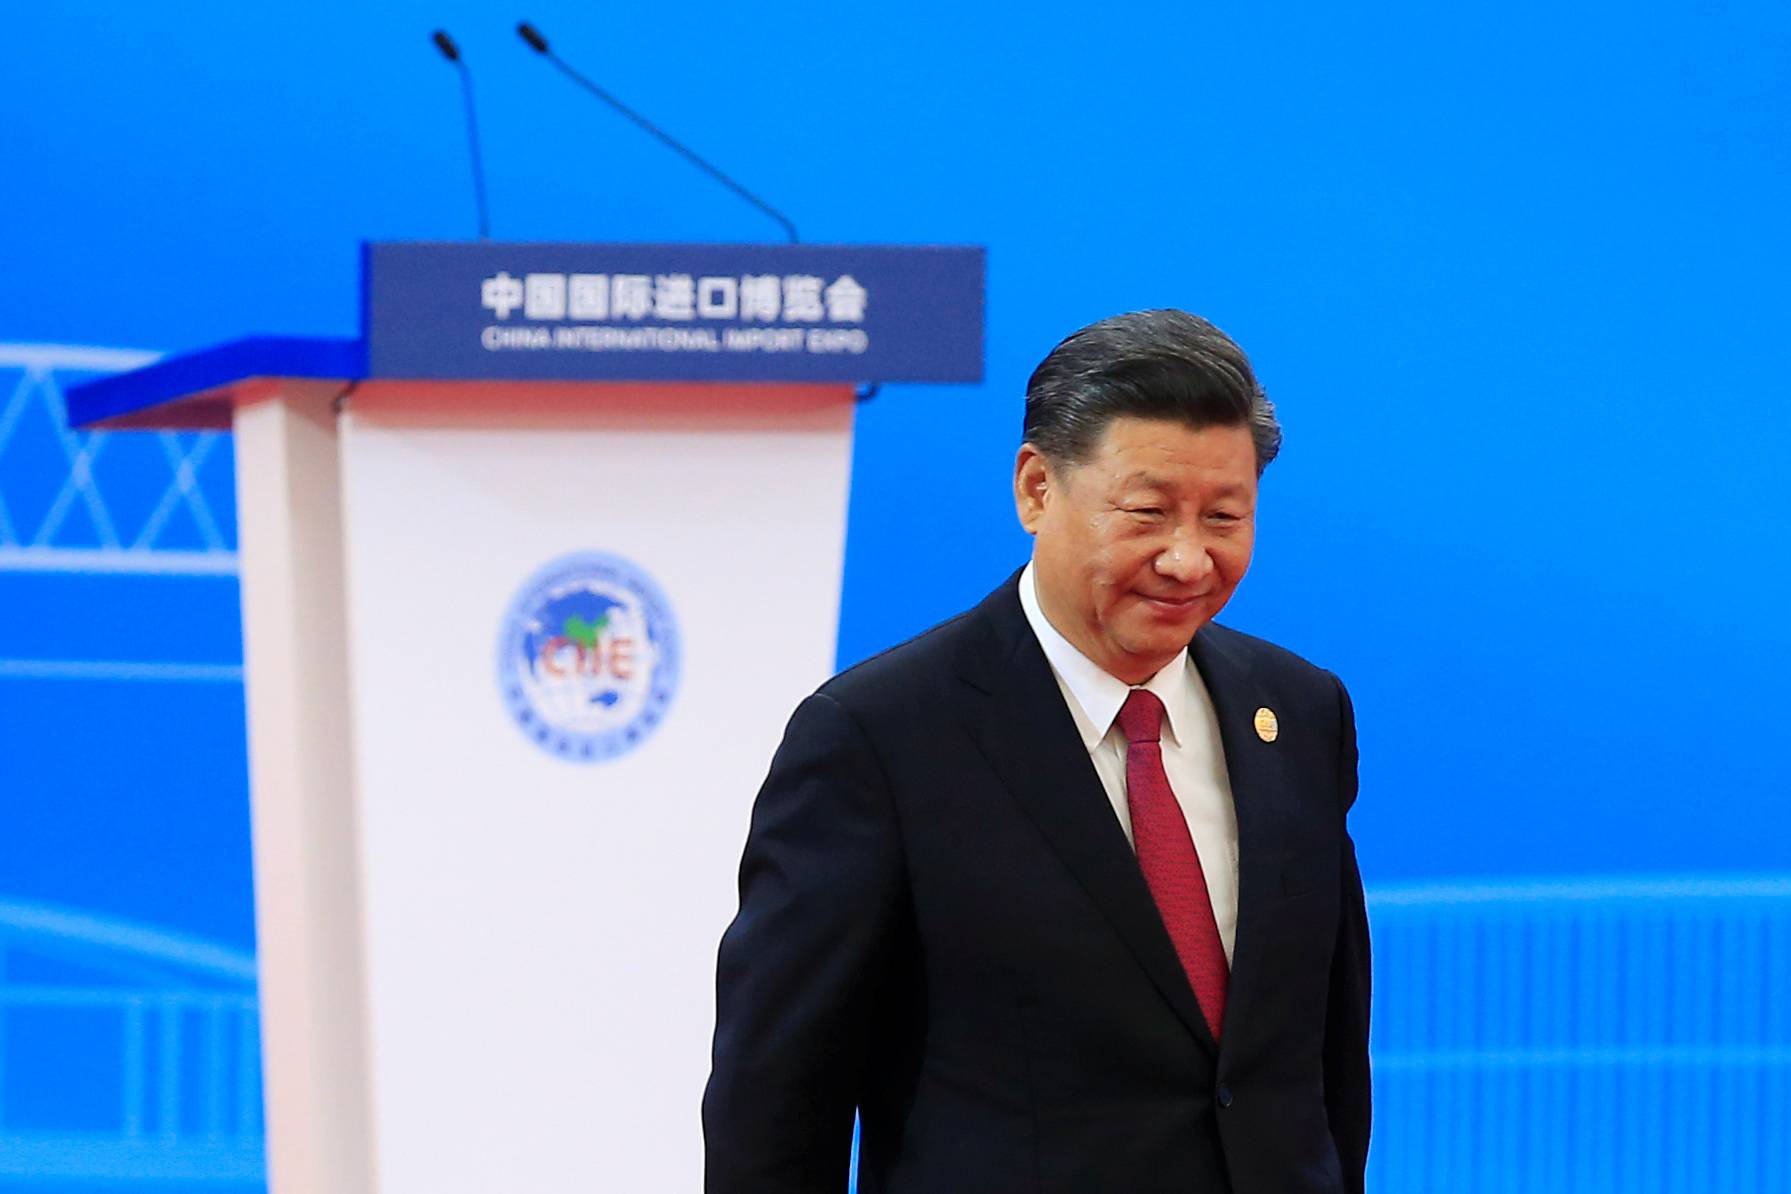 Chinese President Xi Jinping returns to his seat following his speech at the opening ceremony of the second China International Import Expo (CIIE) in Shanghai